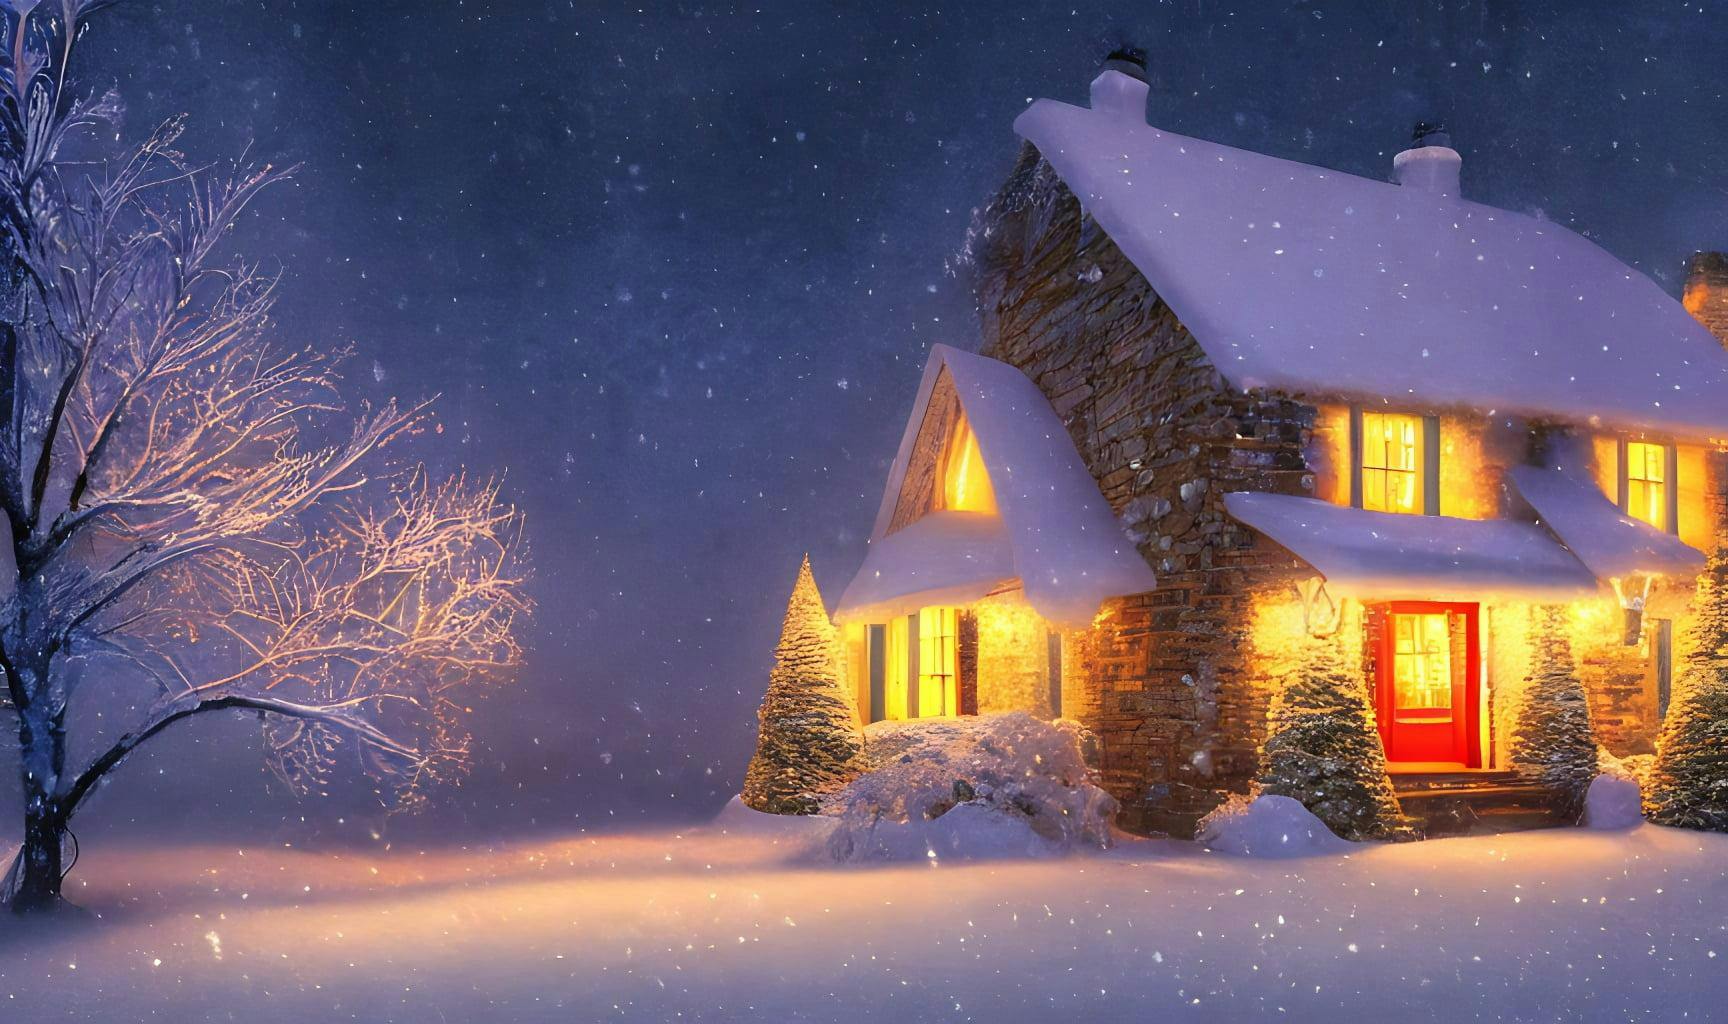 Photorealistic Cold Frigid Winter Night In A Small Cottage By Shady Safari And Thomas Kinkade With An Atmospheric Blue Hazy Hue Midnight Before Christmas Cinematic Scene